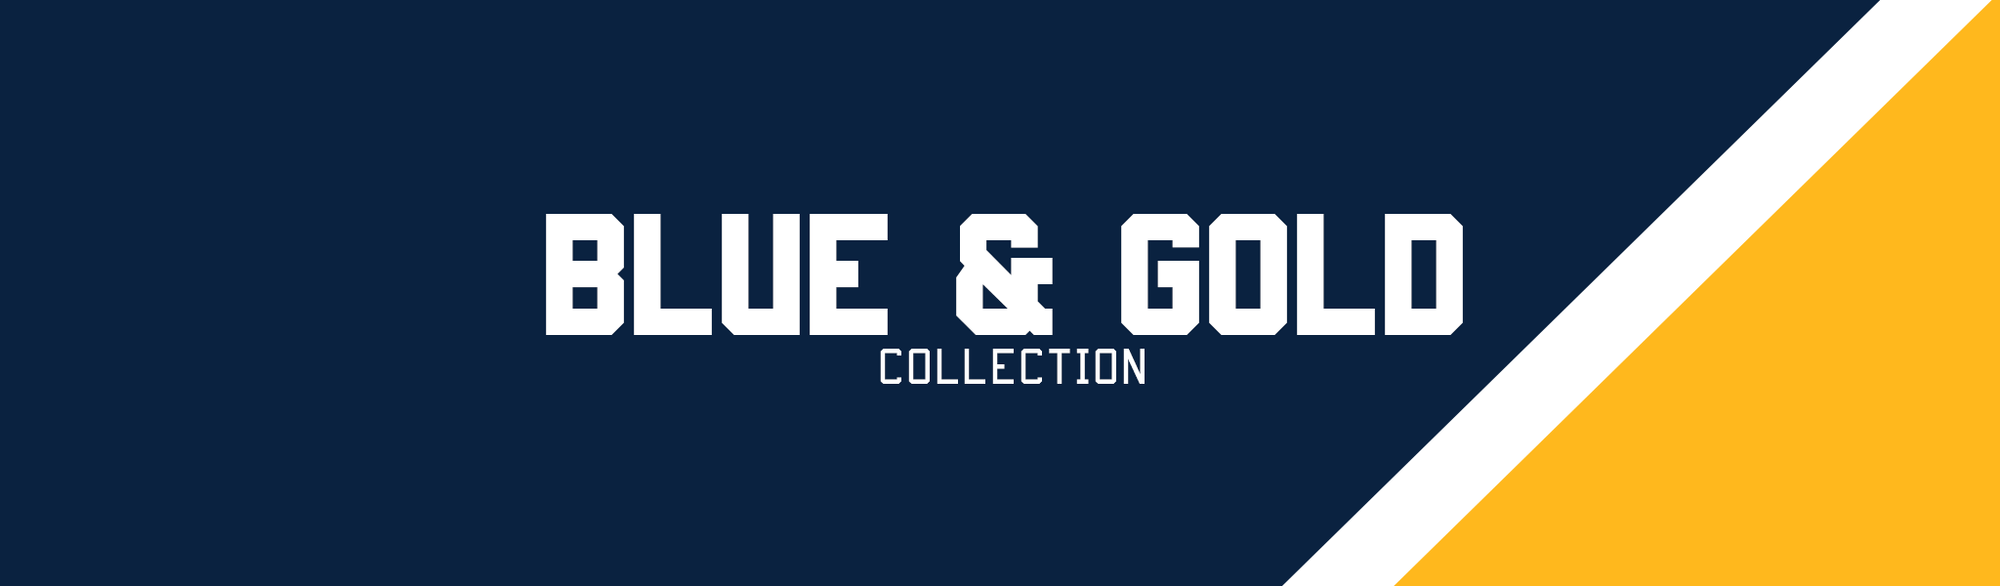 Blue and Gold V Logo - Blue & Gold Collection | The Shop Indy